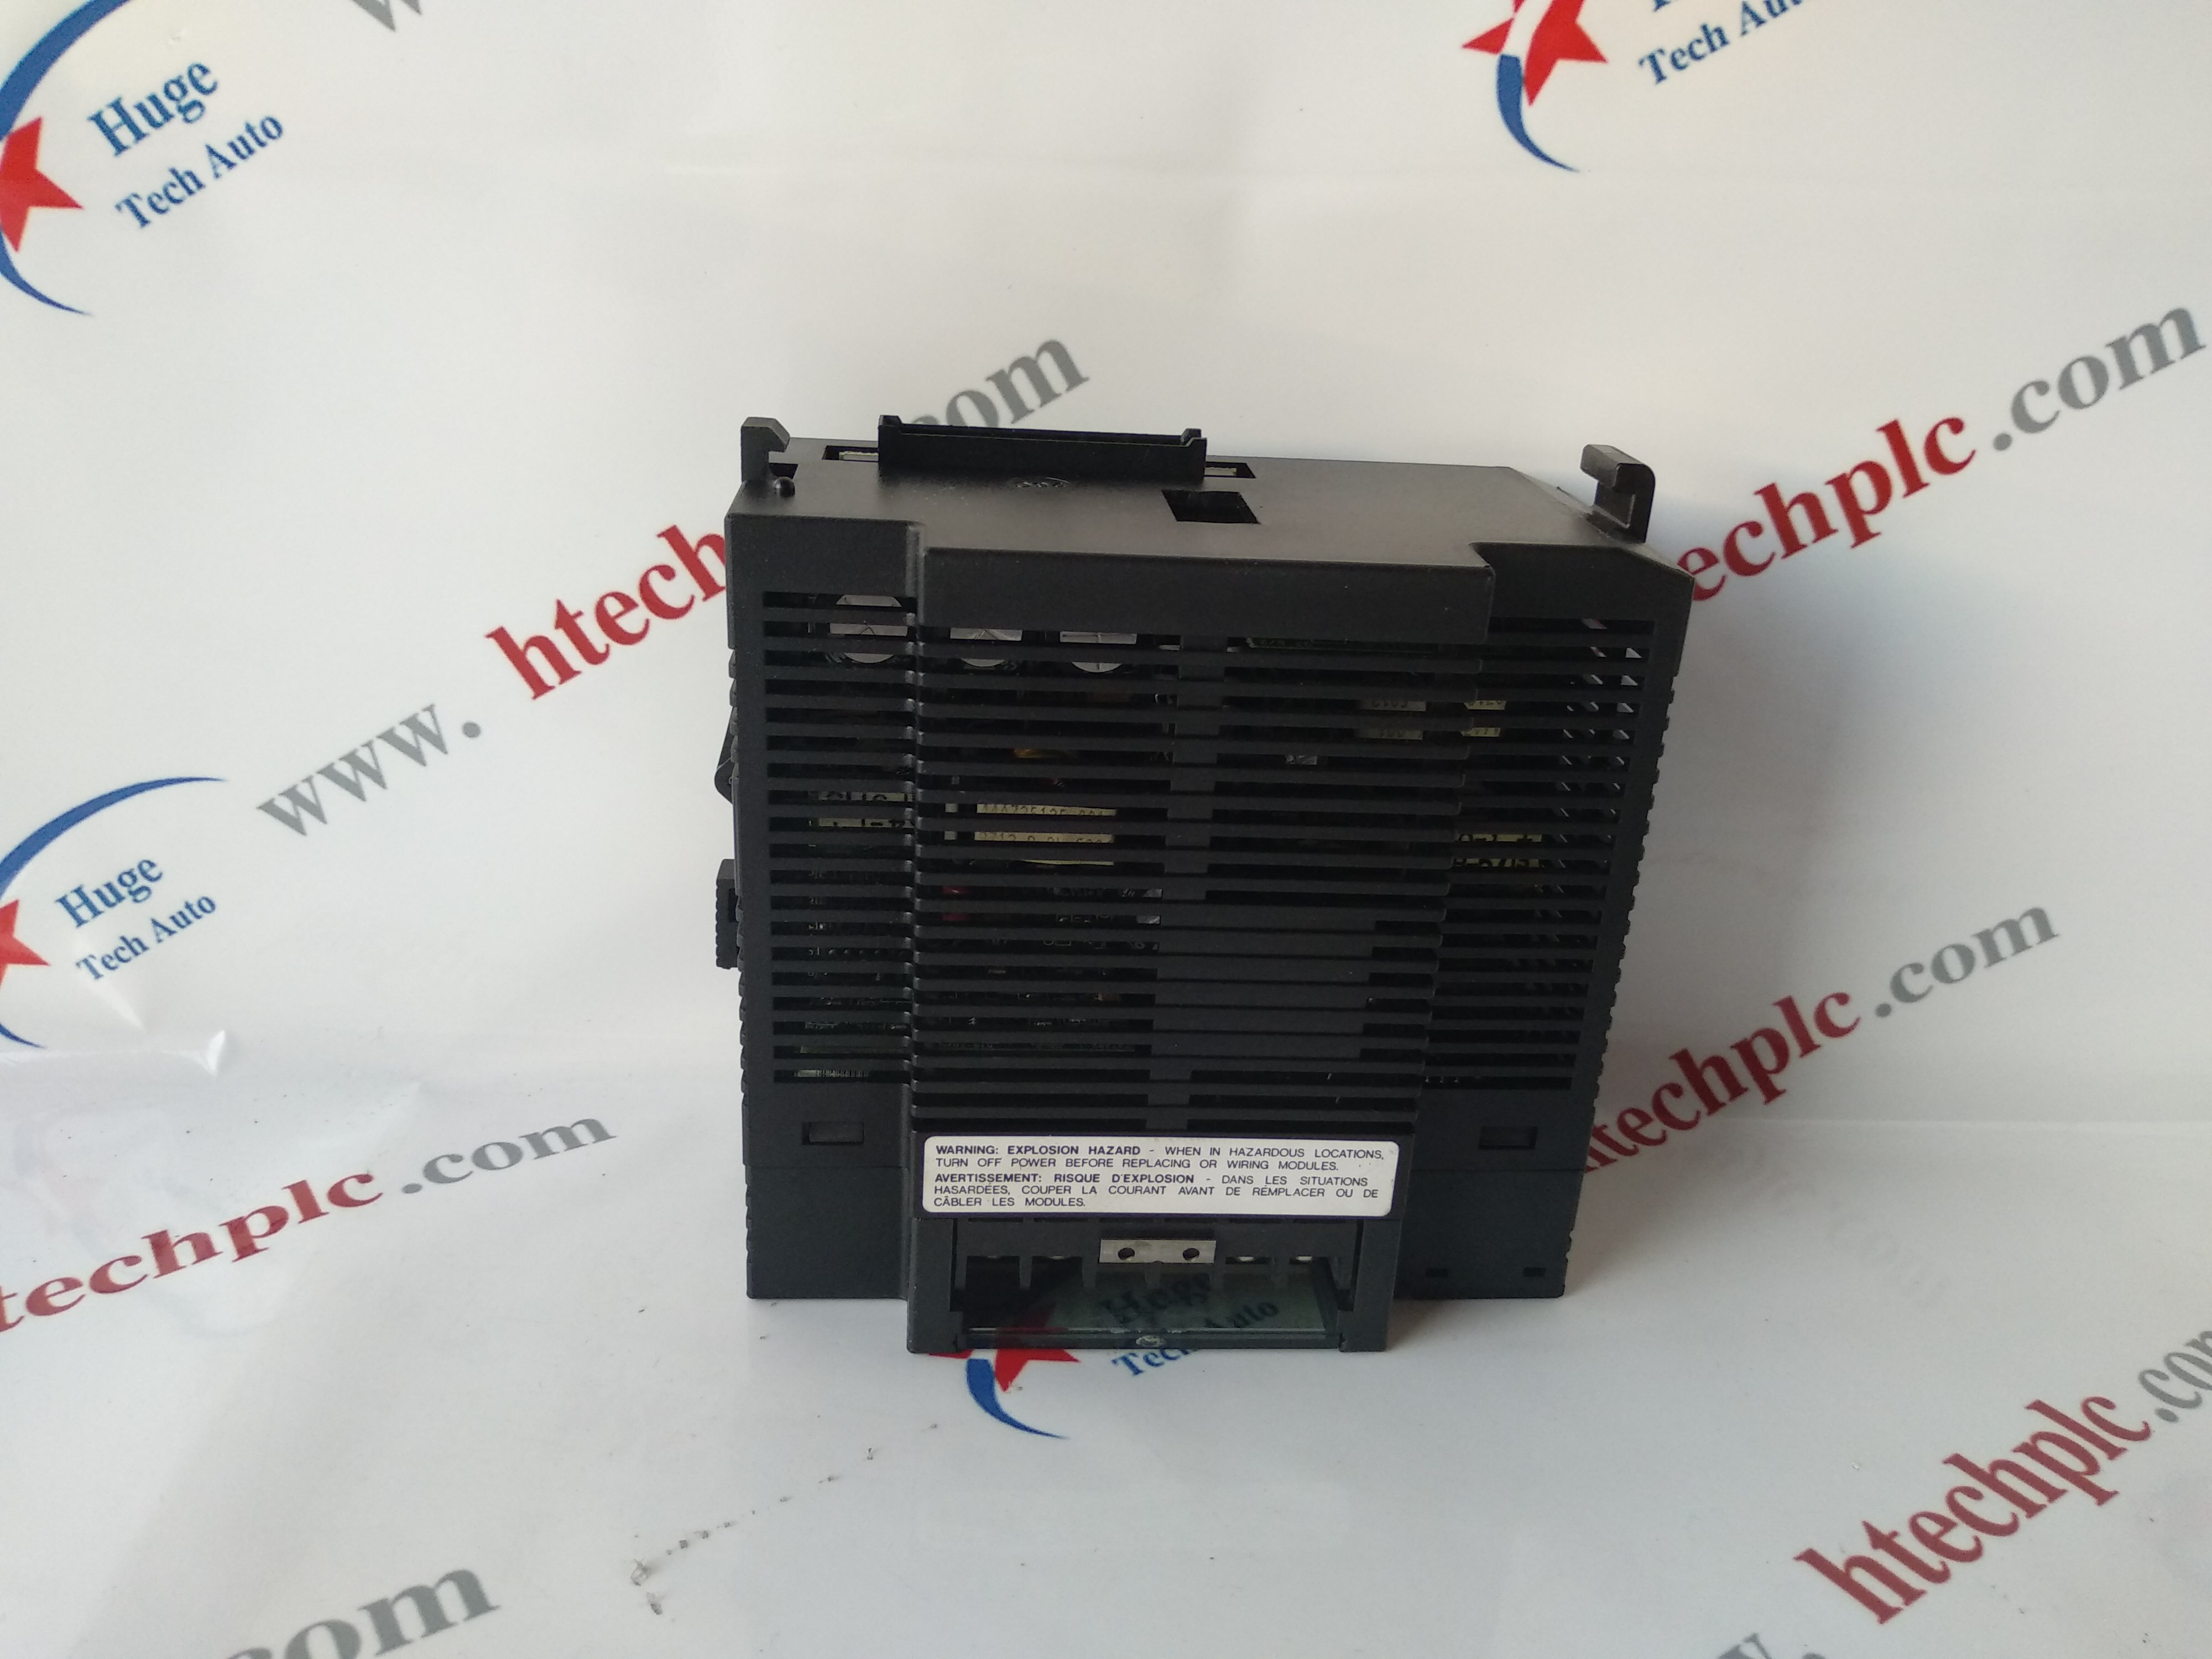 GE 531X123PCHAEG1 brand new PLC DCS TSI system spare parts in stock